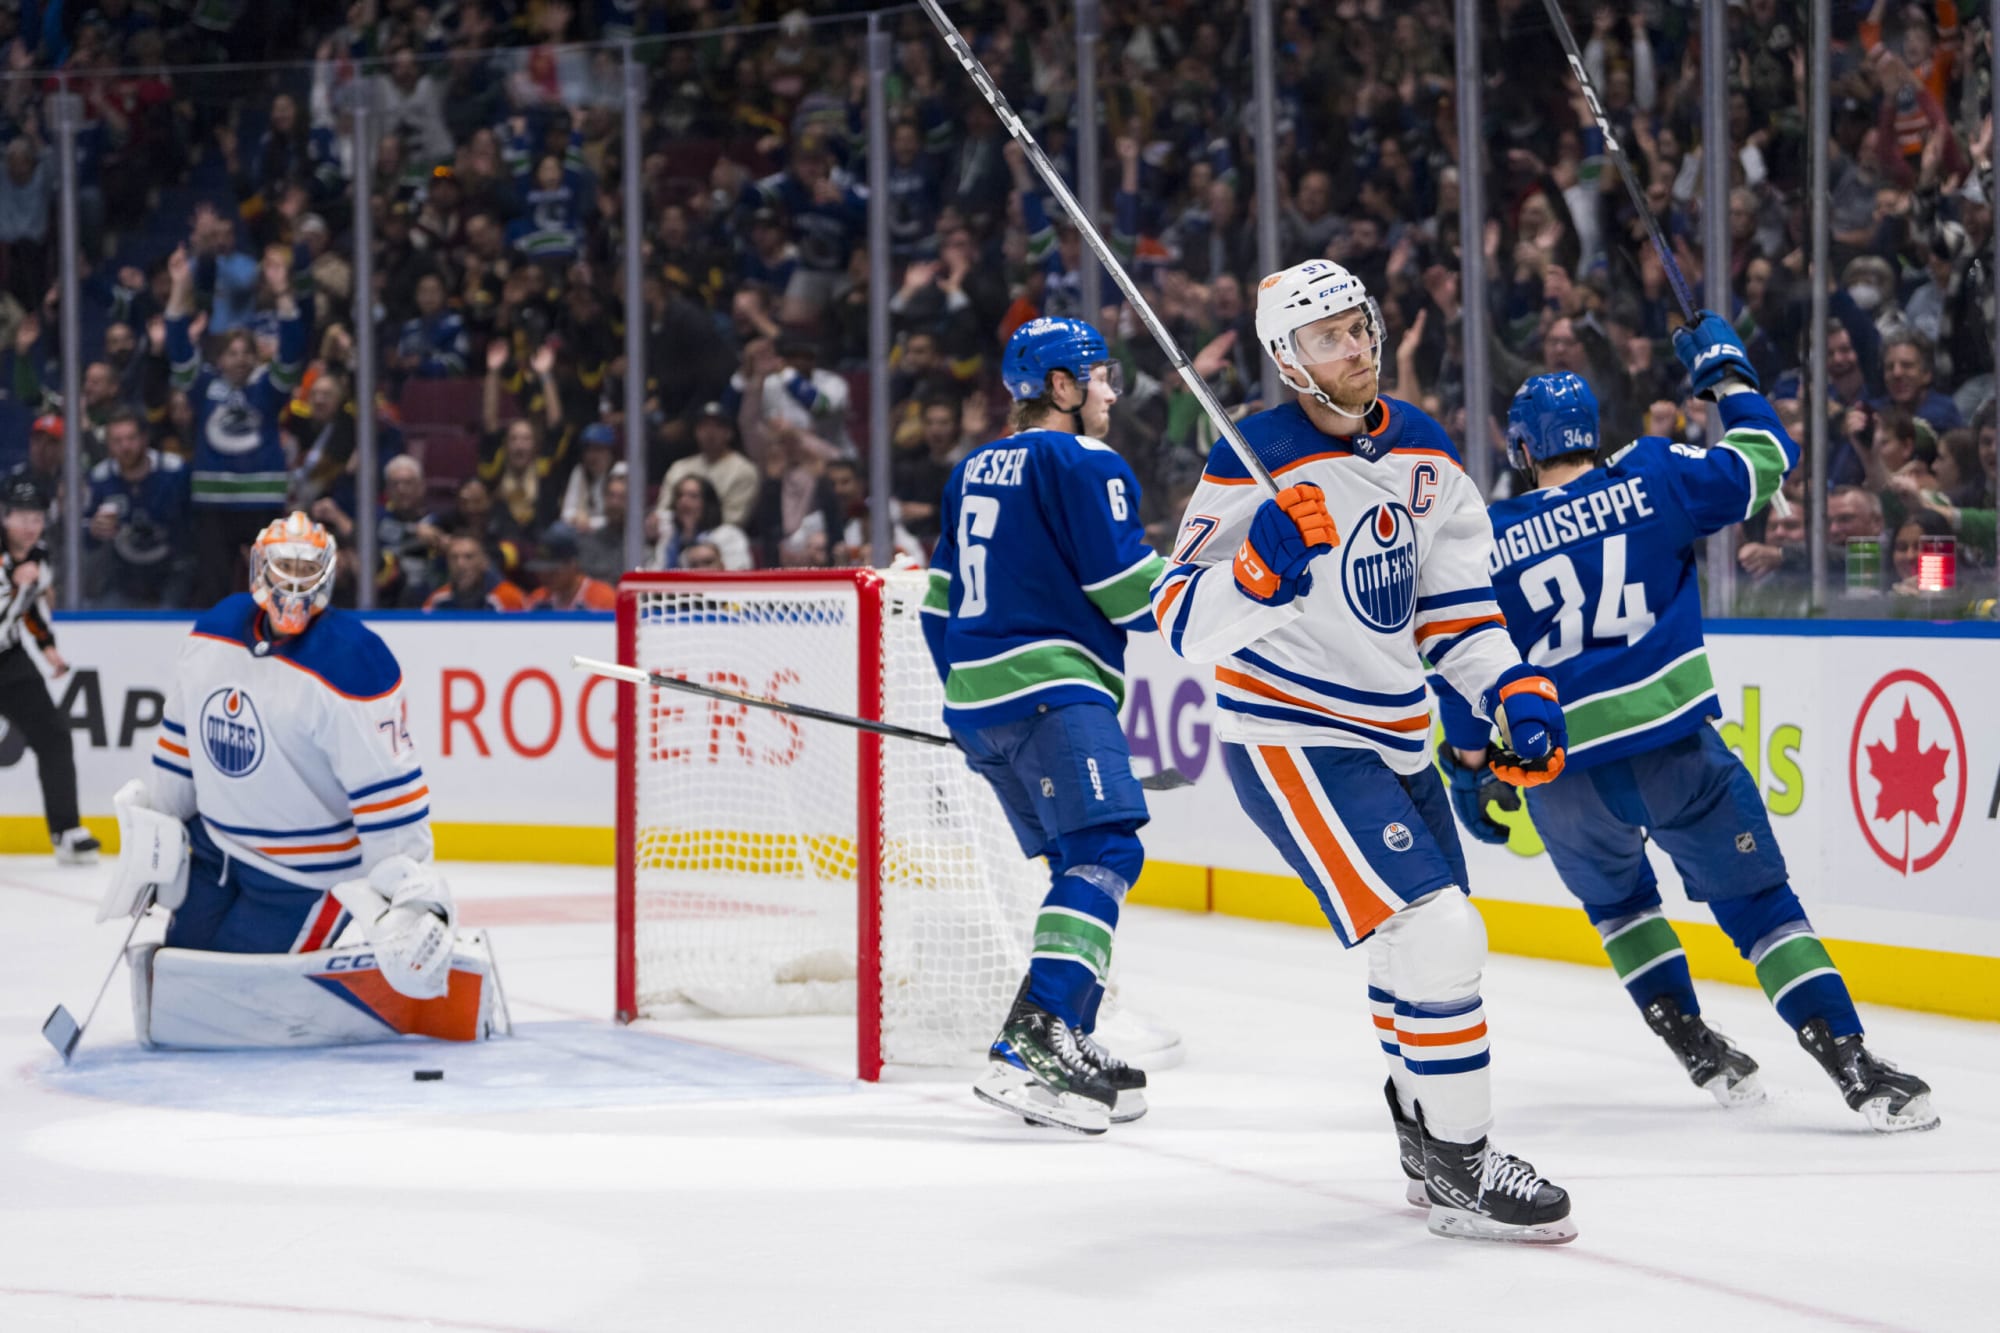 How concerning is the Oilers' rough start?